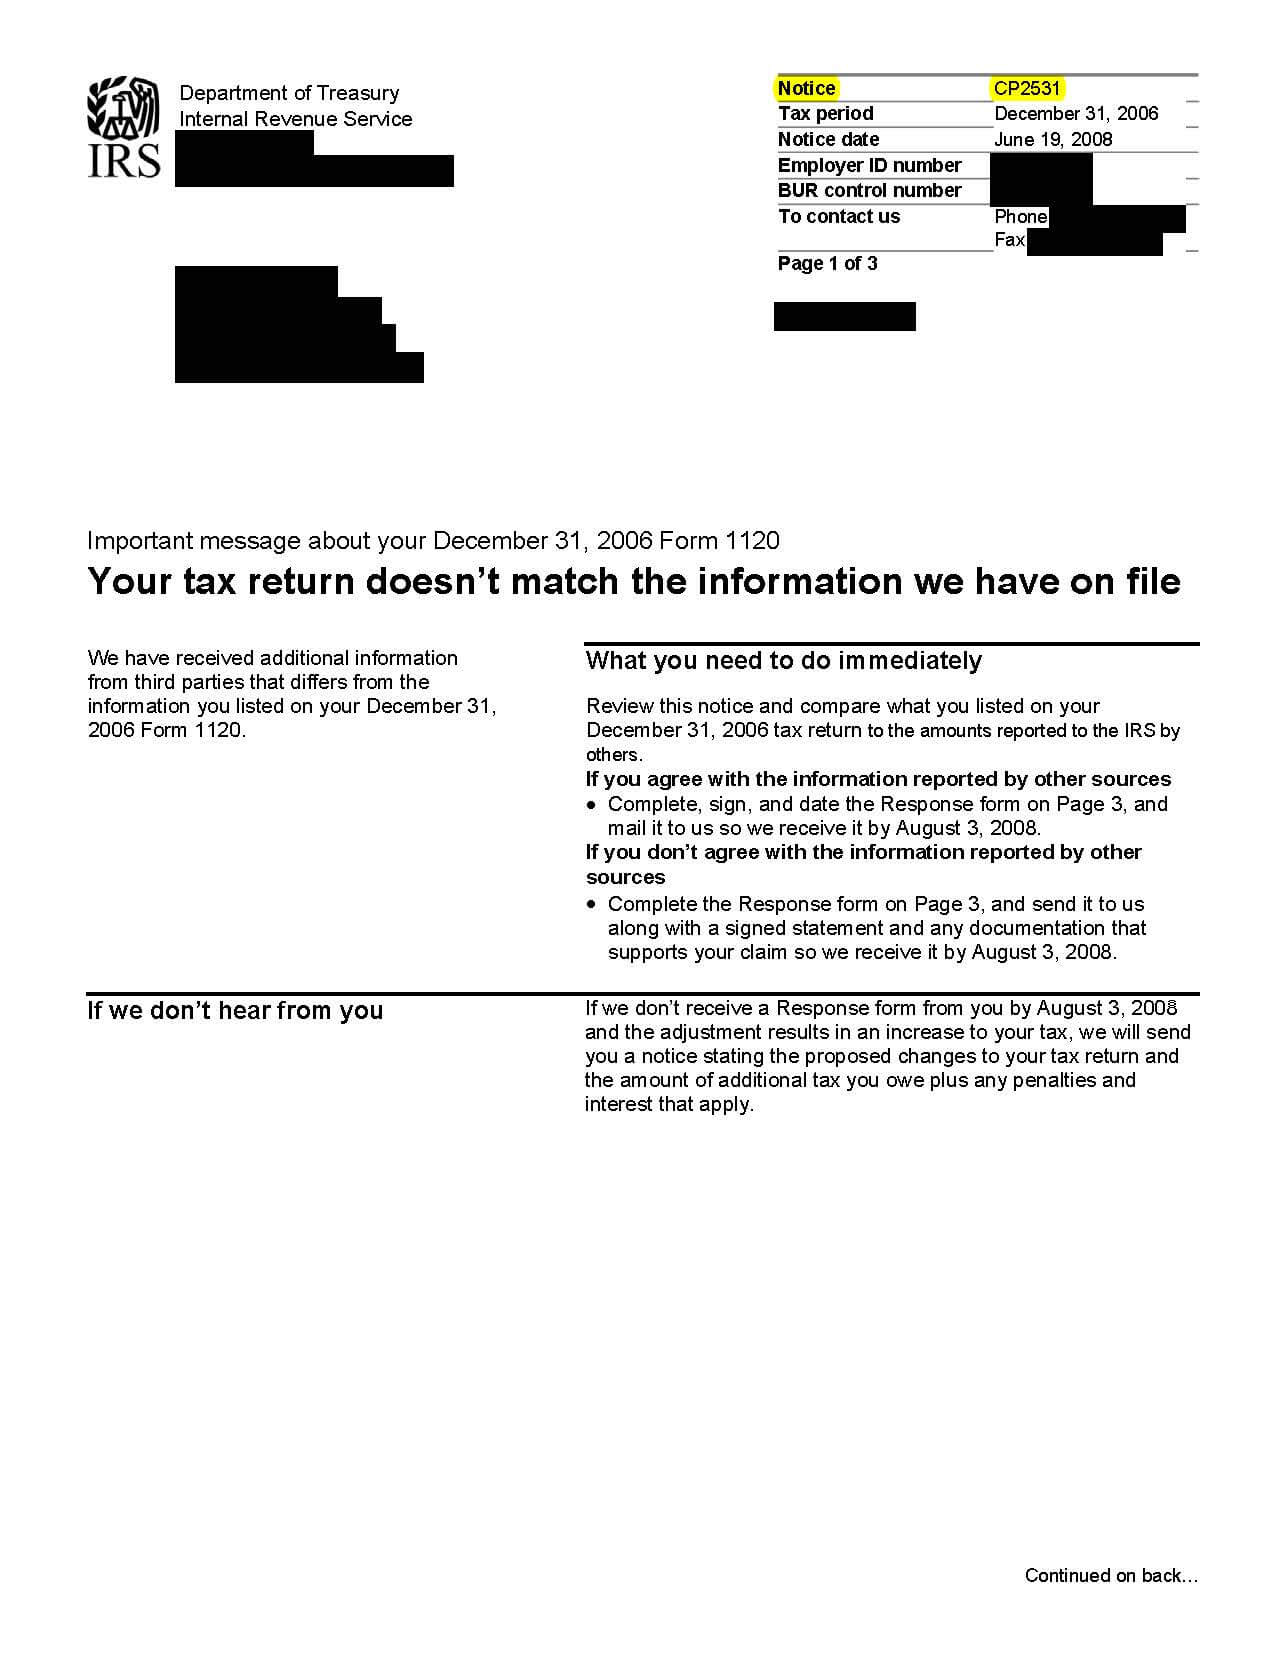 IRS Notice CP2531 states that the IRS records are different than what was reported on the business tax return.